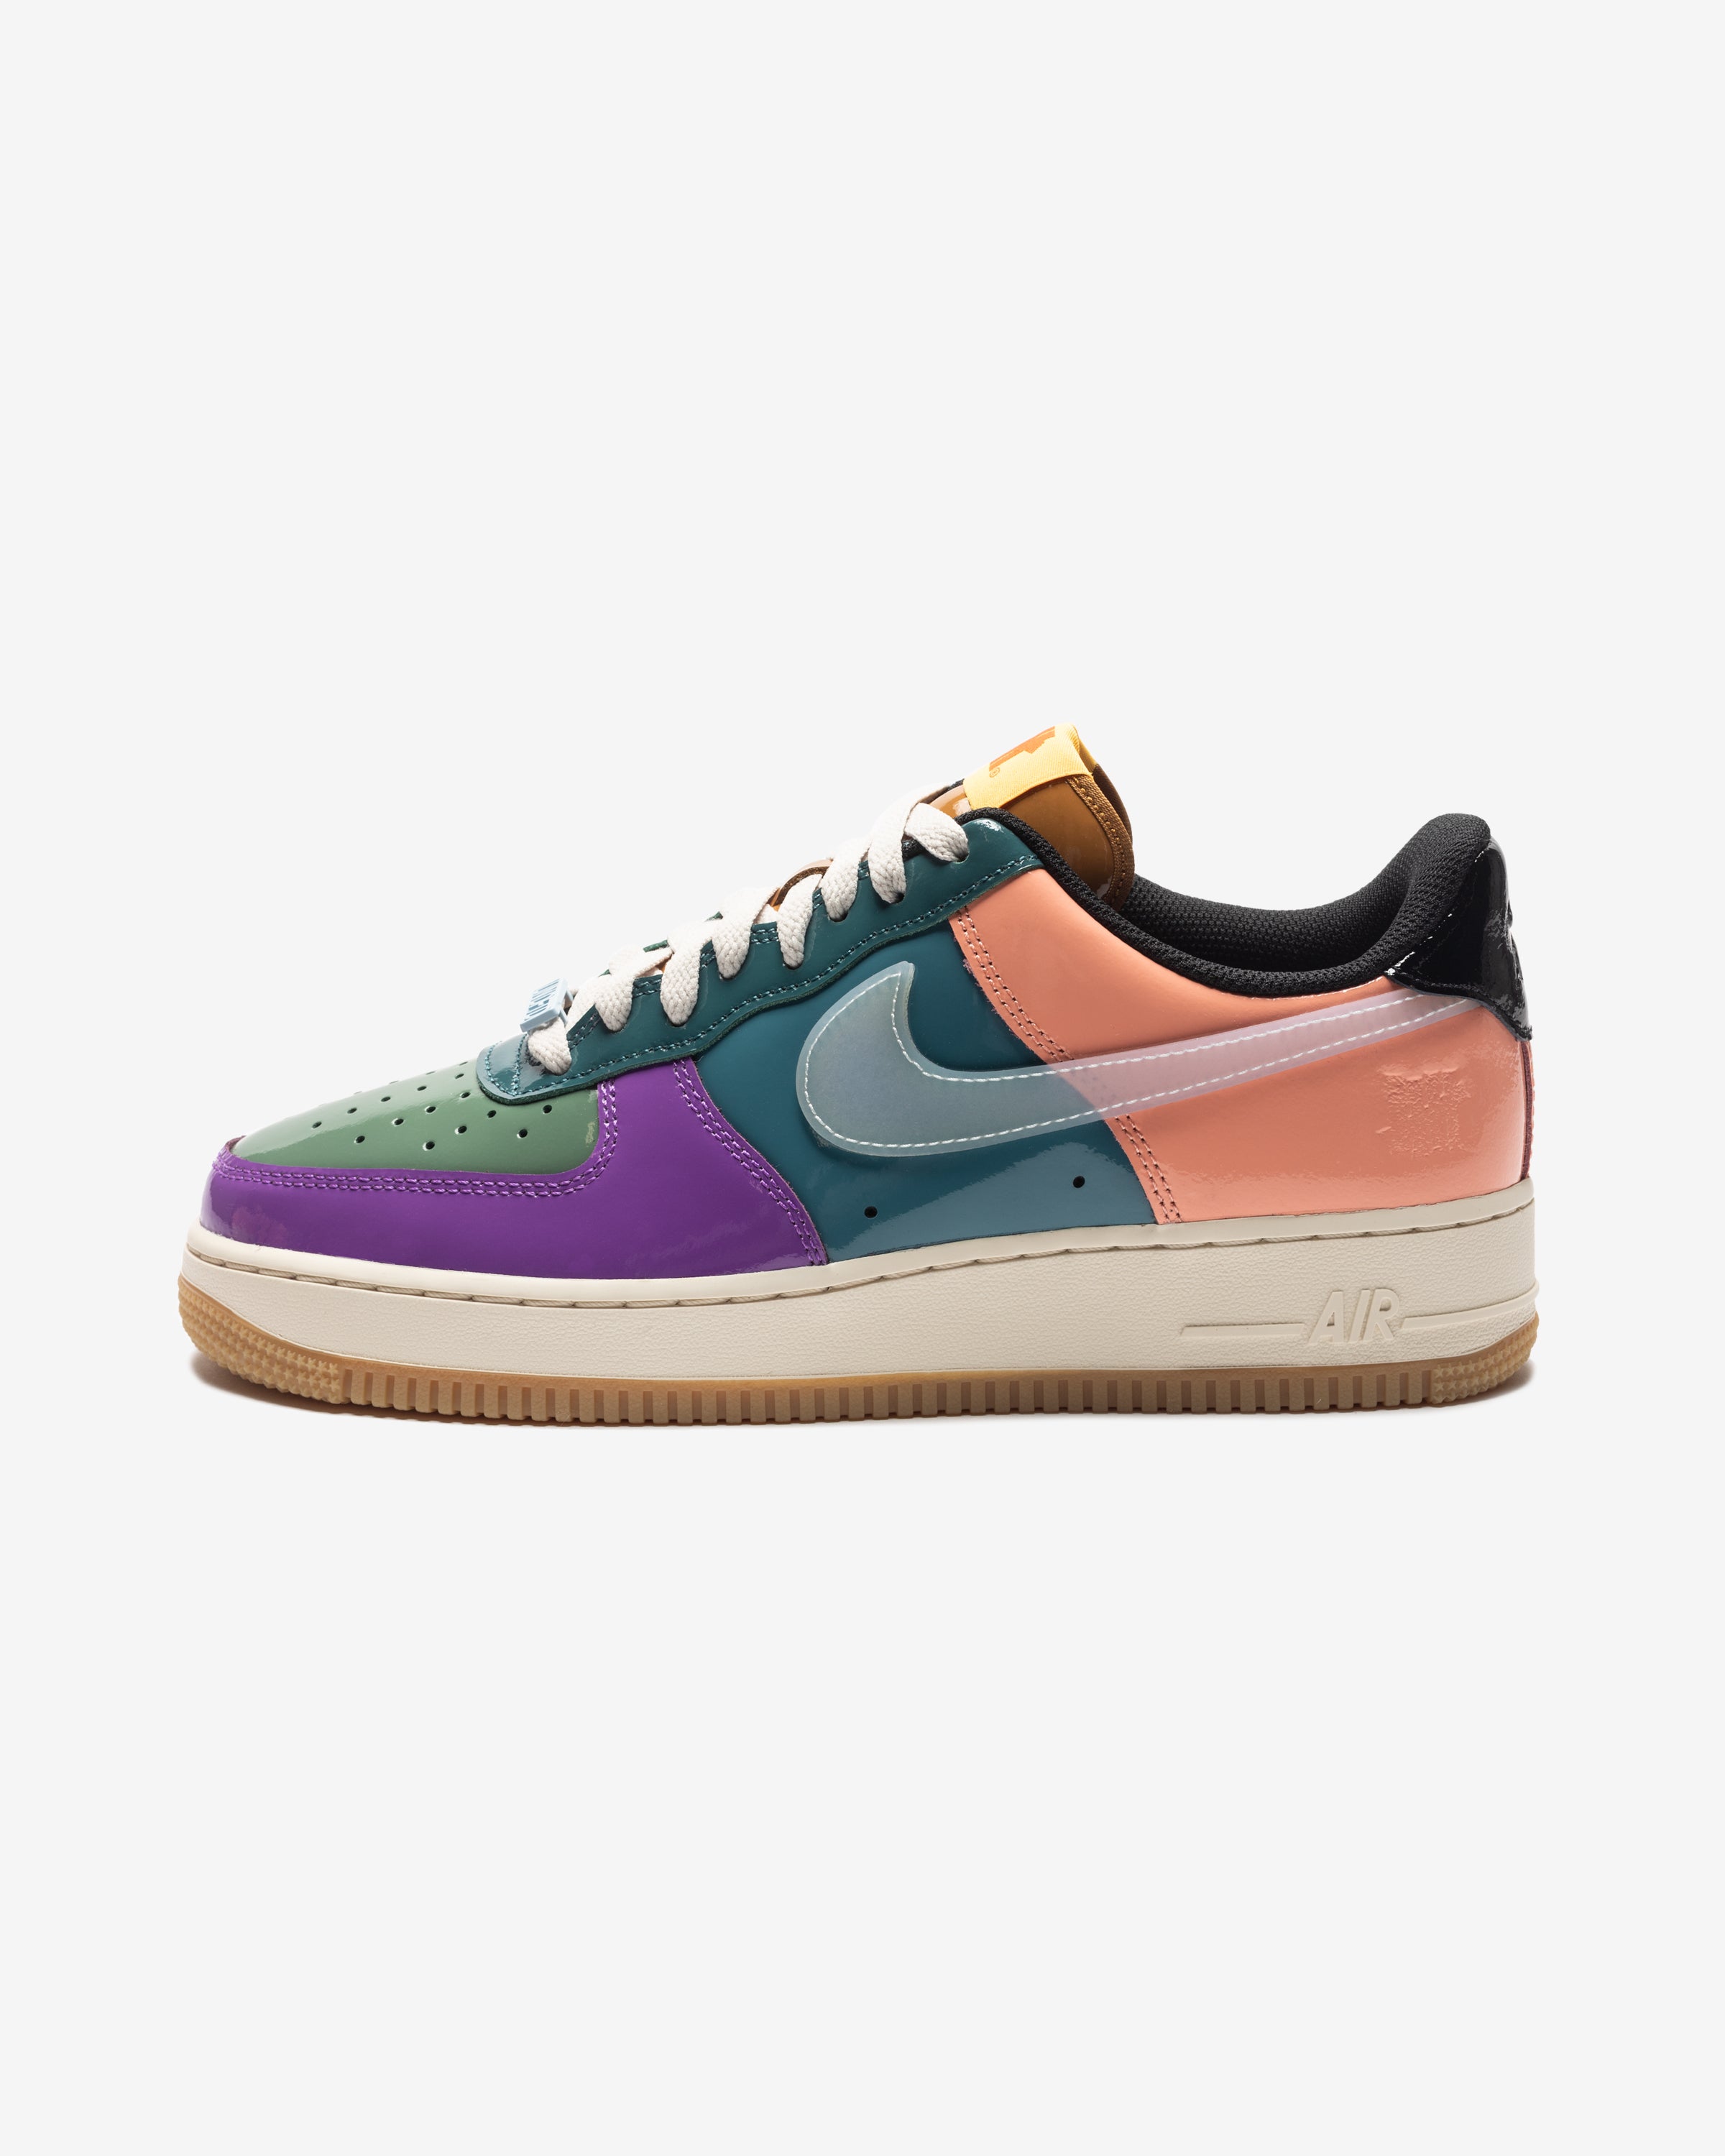 Nike Air Force 1 Low SP x Undefeated Shoes Wild Berry Blue DV5255-500  Men's NEW